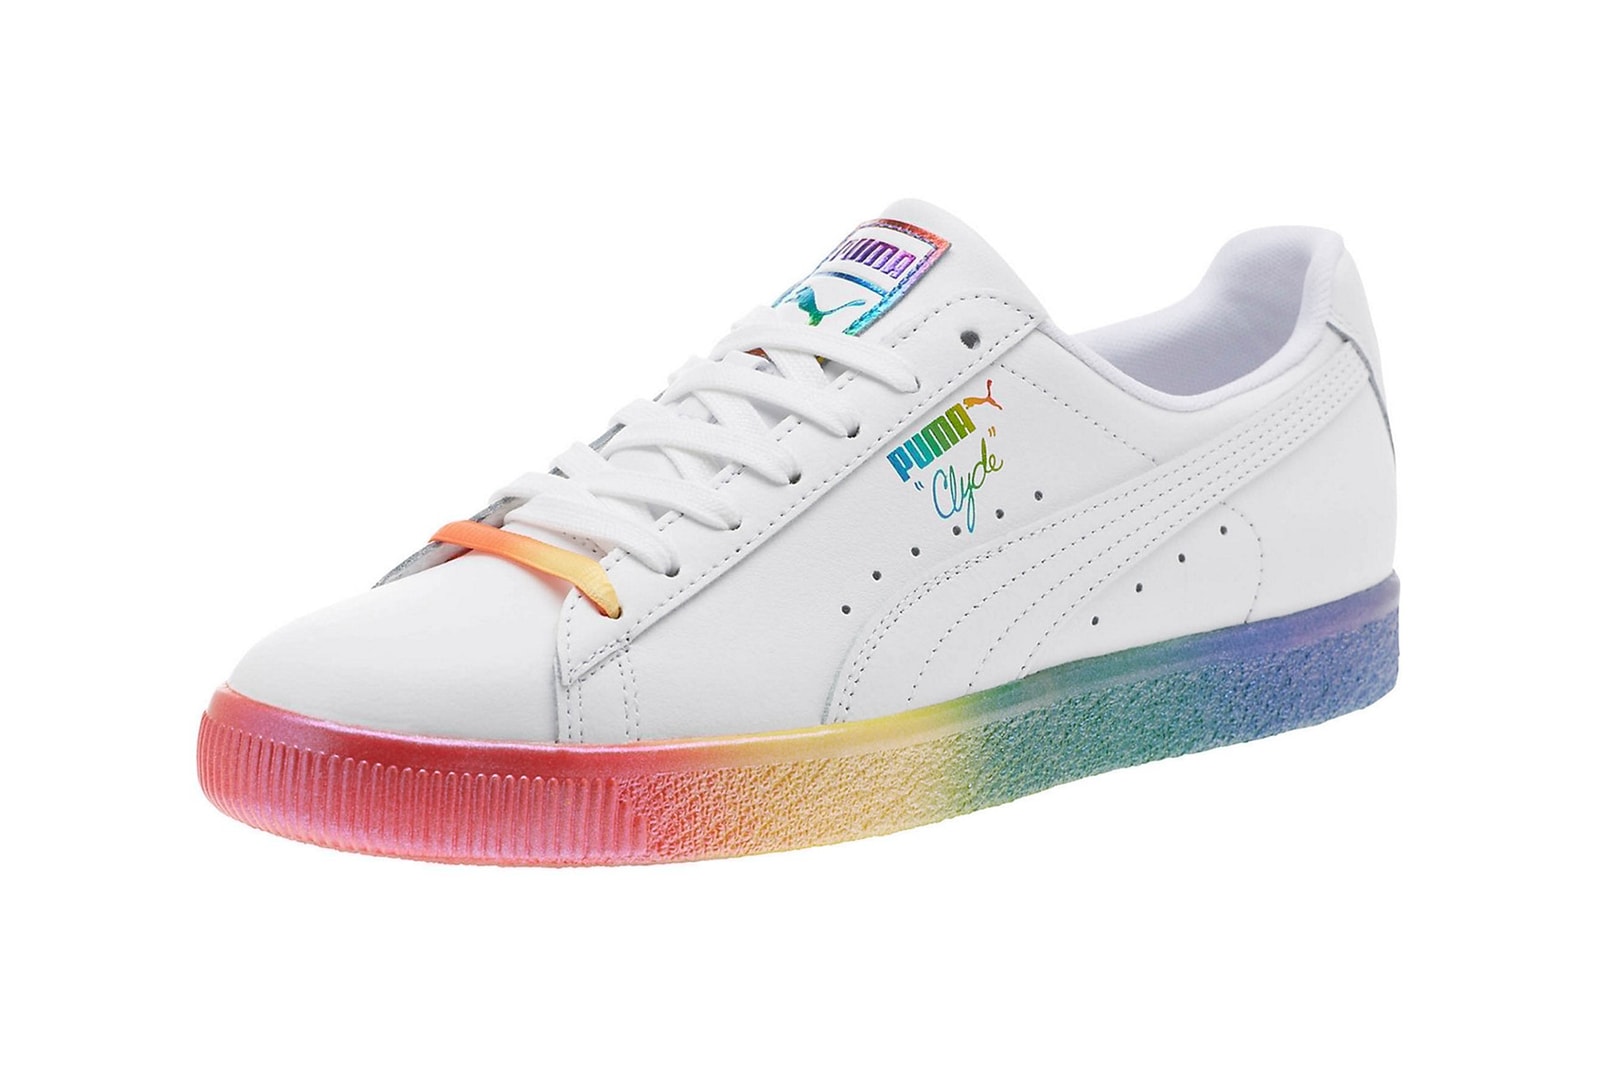 Pride products 2017 LGBTQ rainbow sneakers apparel